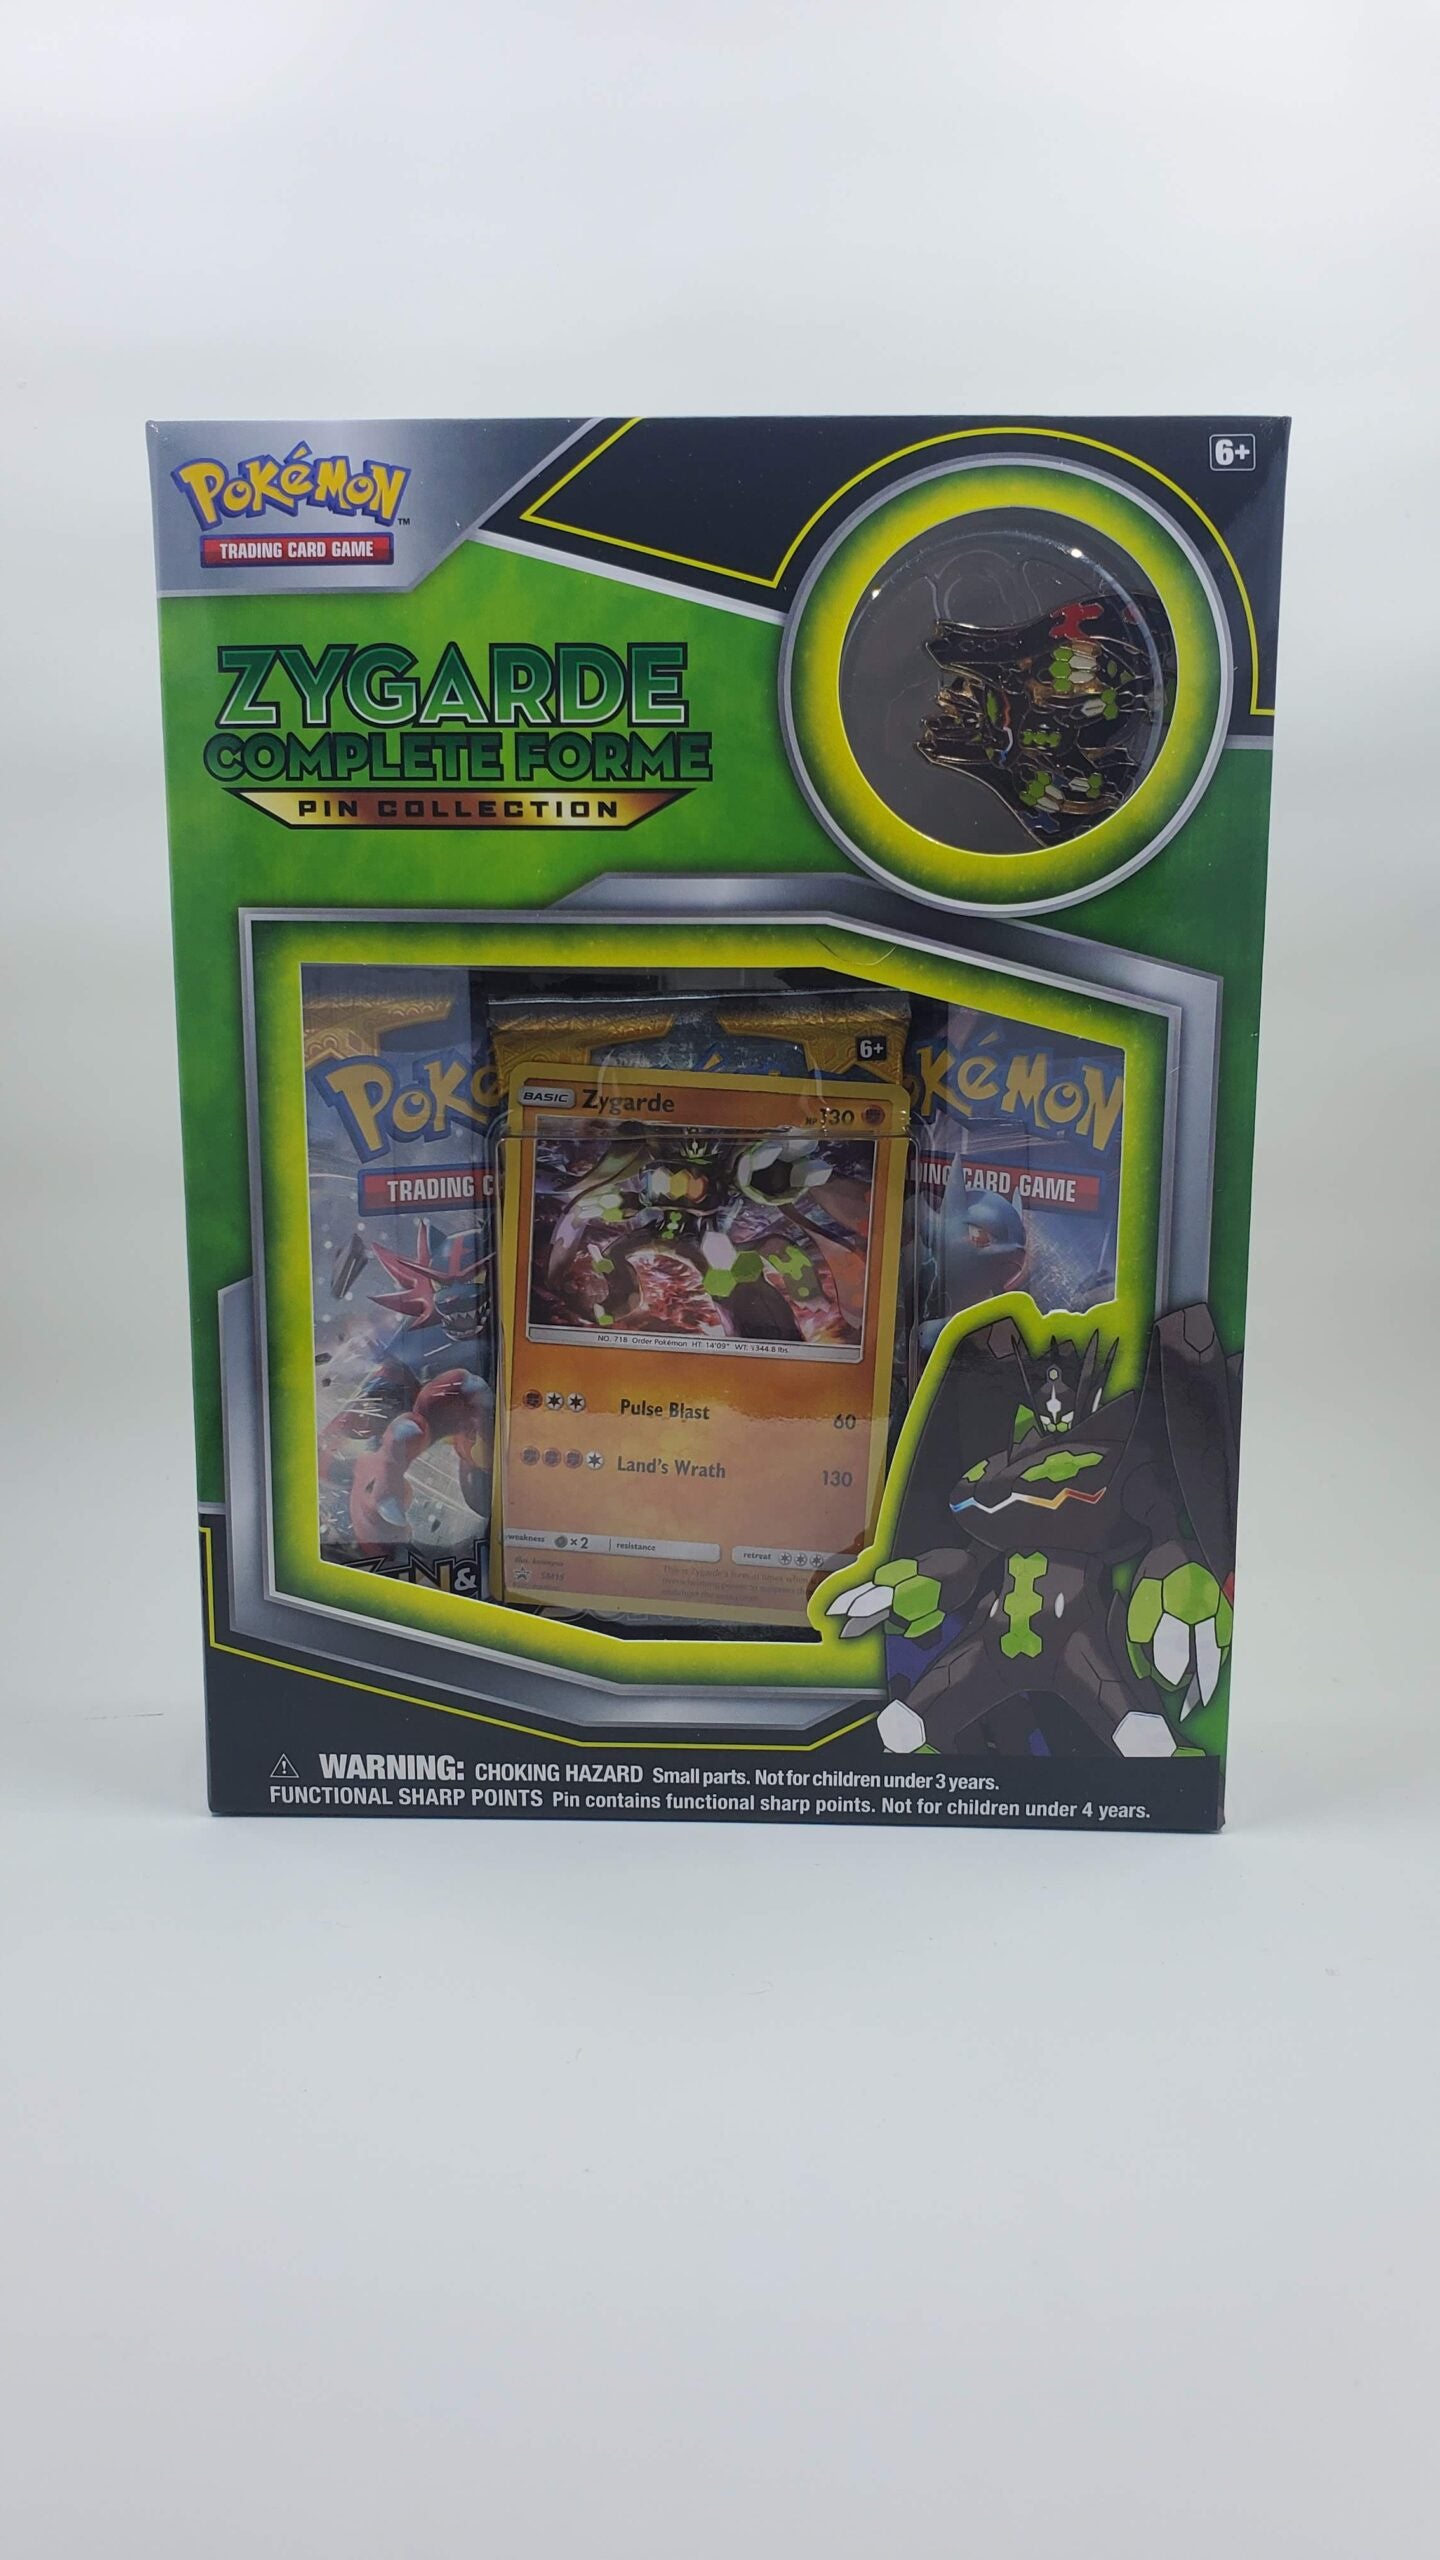 Zygarde Complete Forme Pin Collection Box